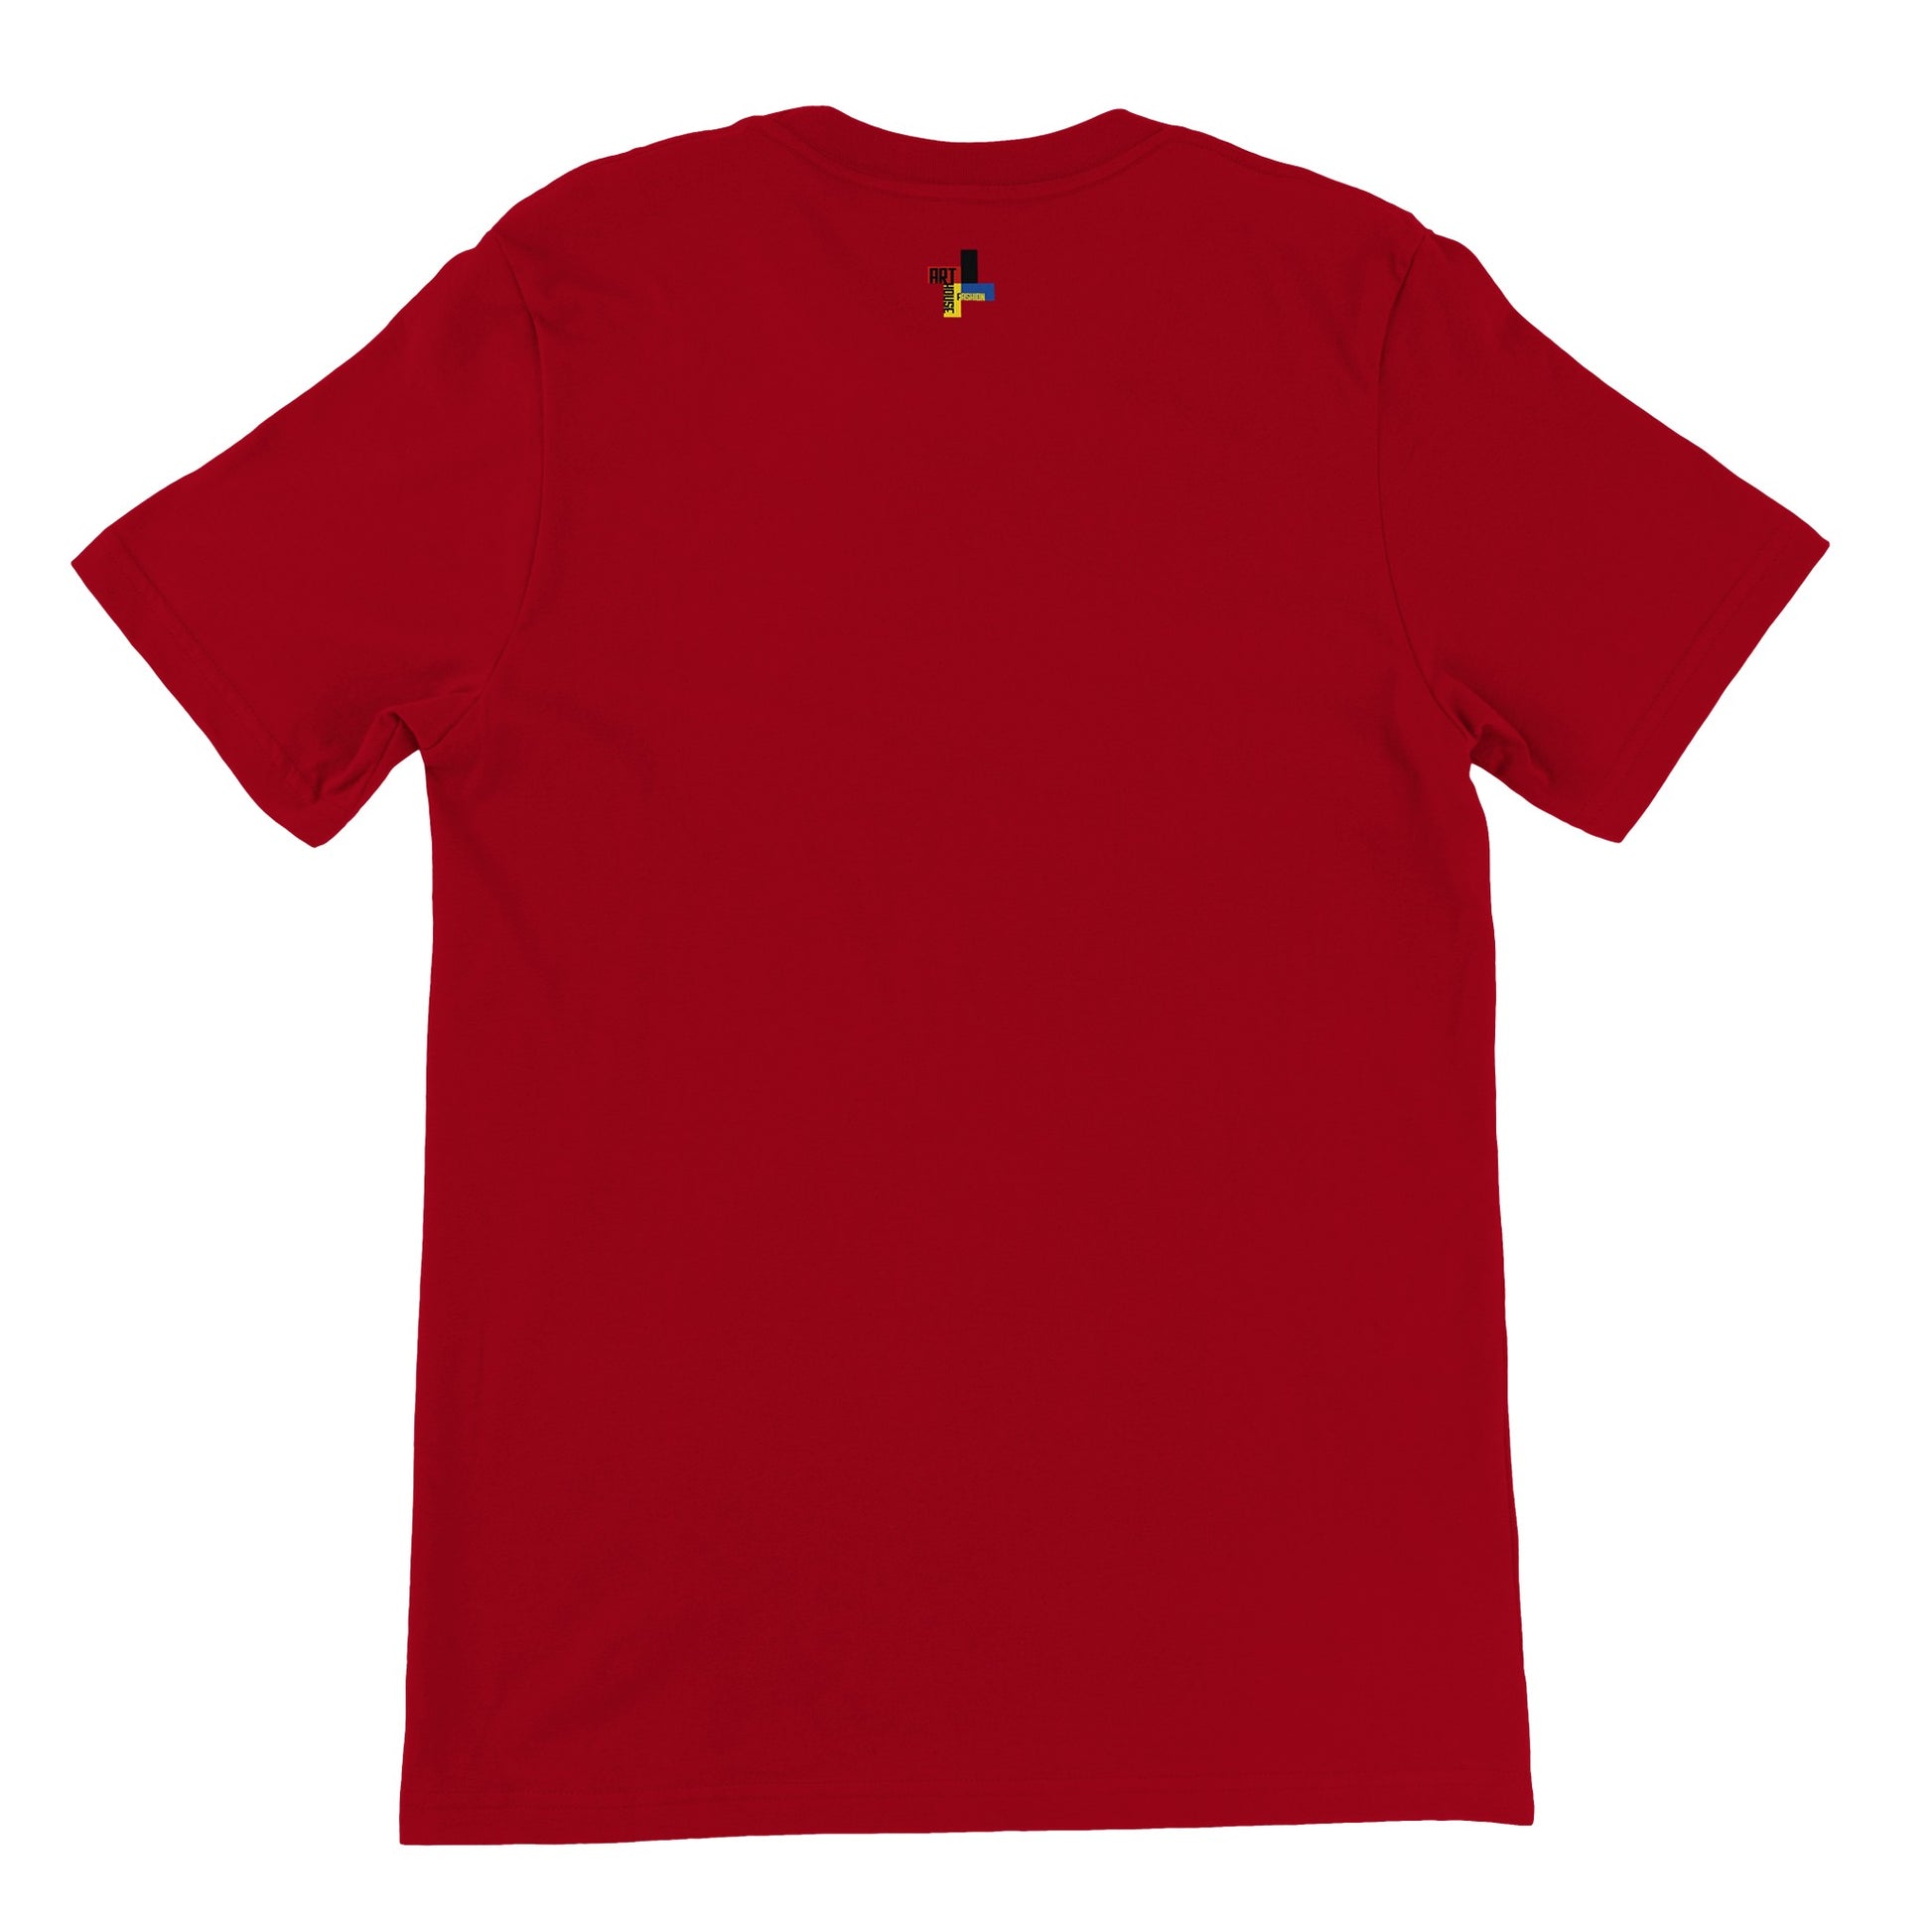 a red t - shirt with a small logo on the chest